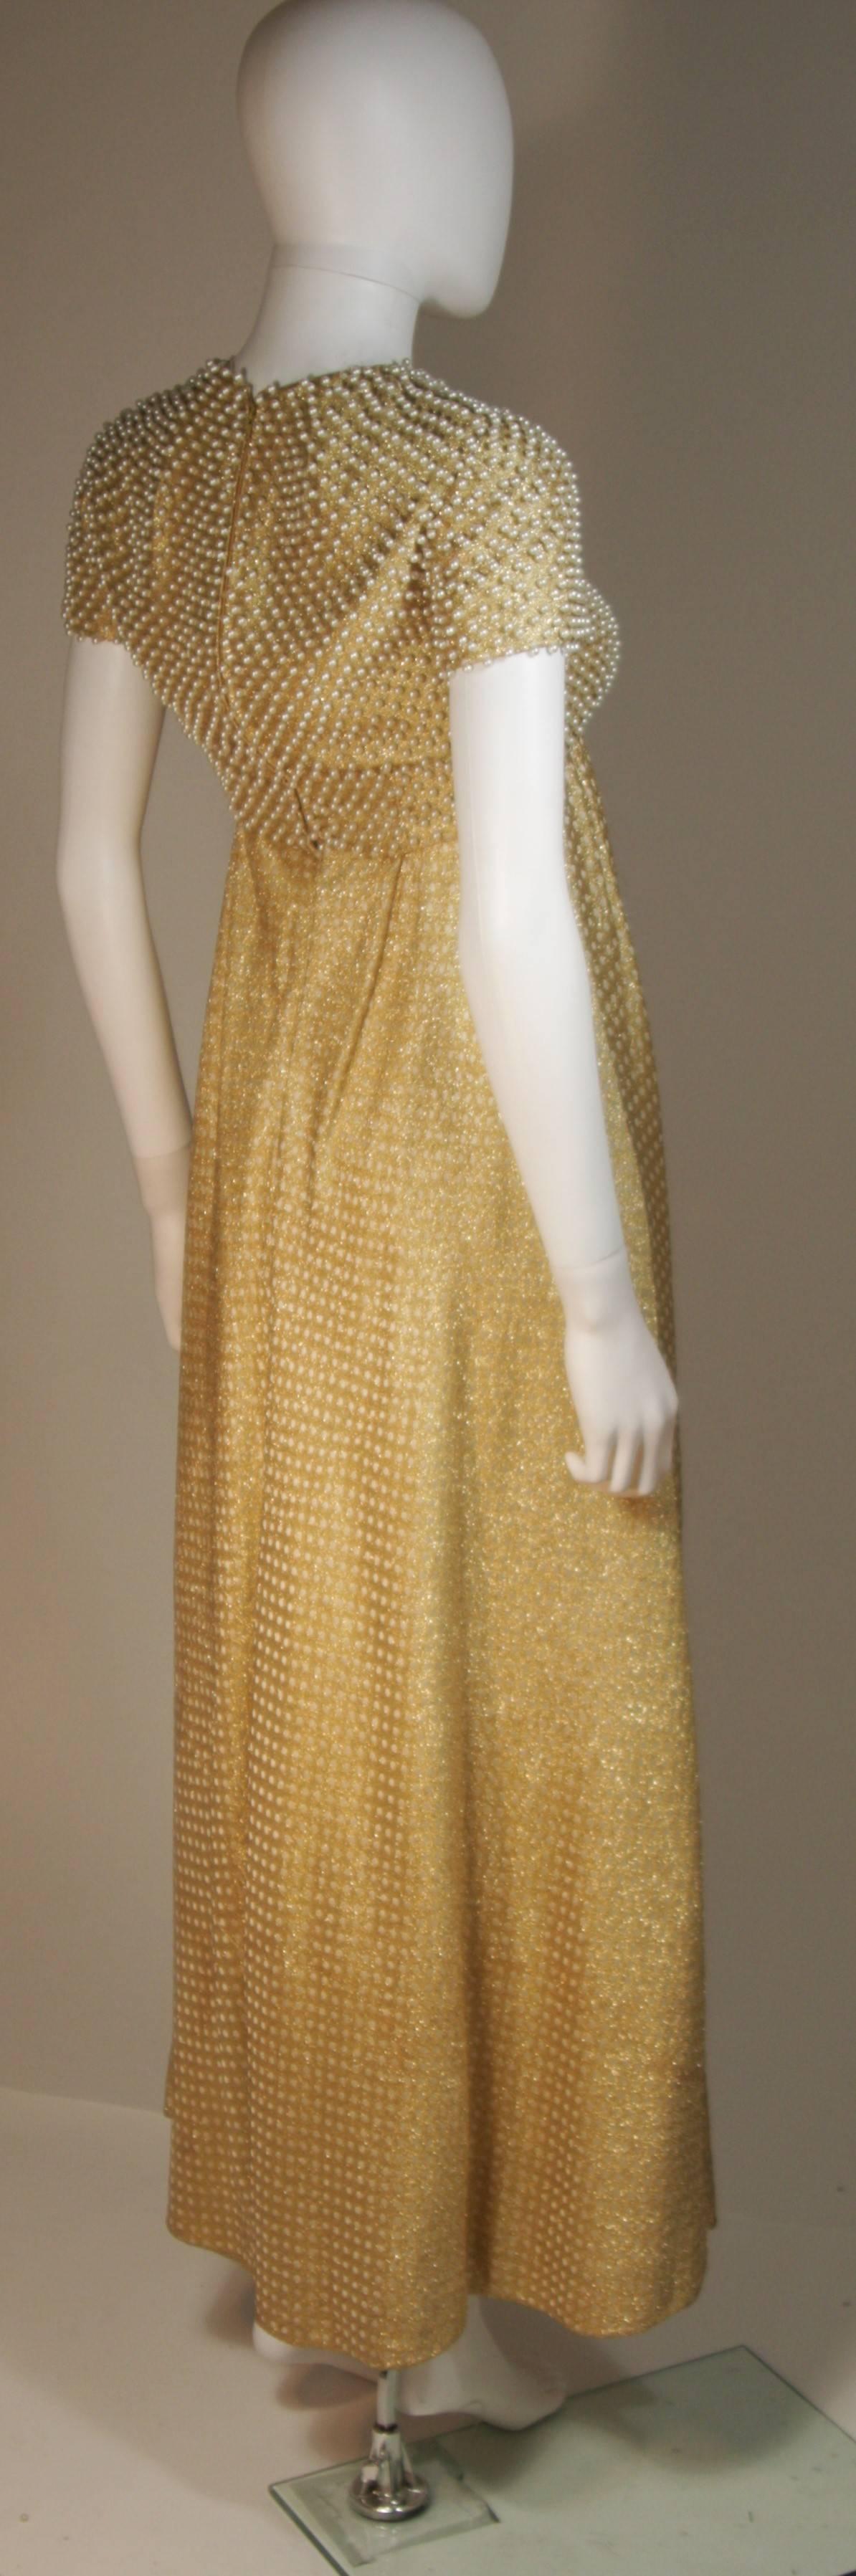 GEOFFREY BEENE 1960's Gold Lame Pearl Bodice Baby Doll Gown Size 2-4 In Excellent Condition For Sale In Los Angeles, CA